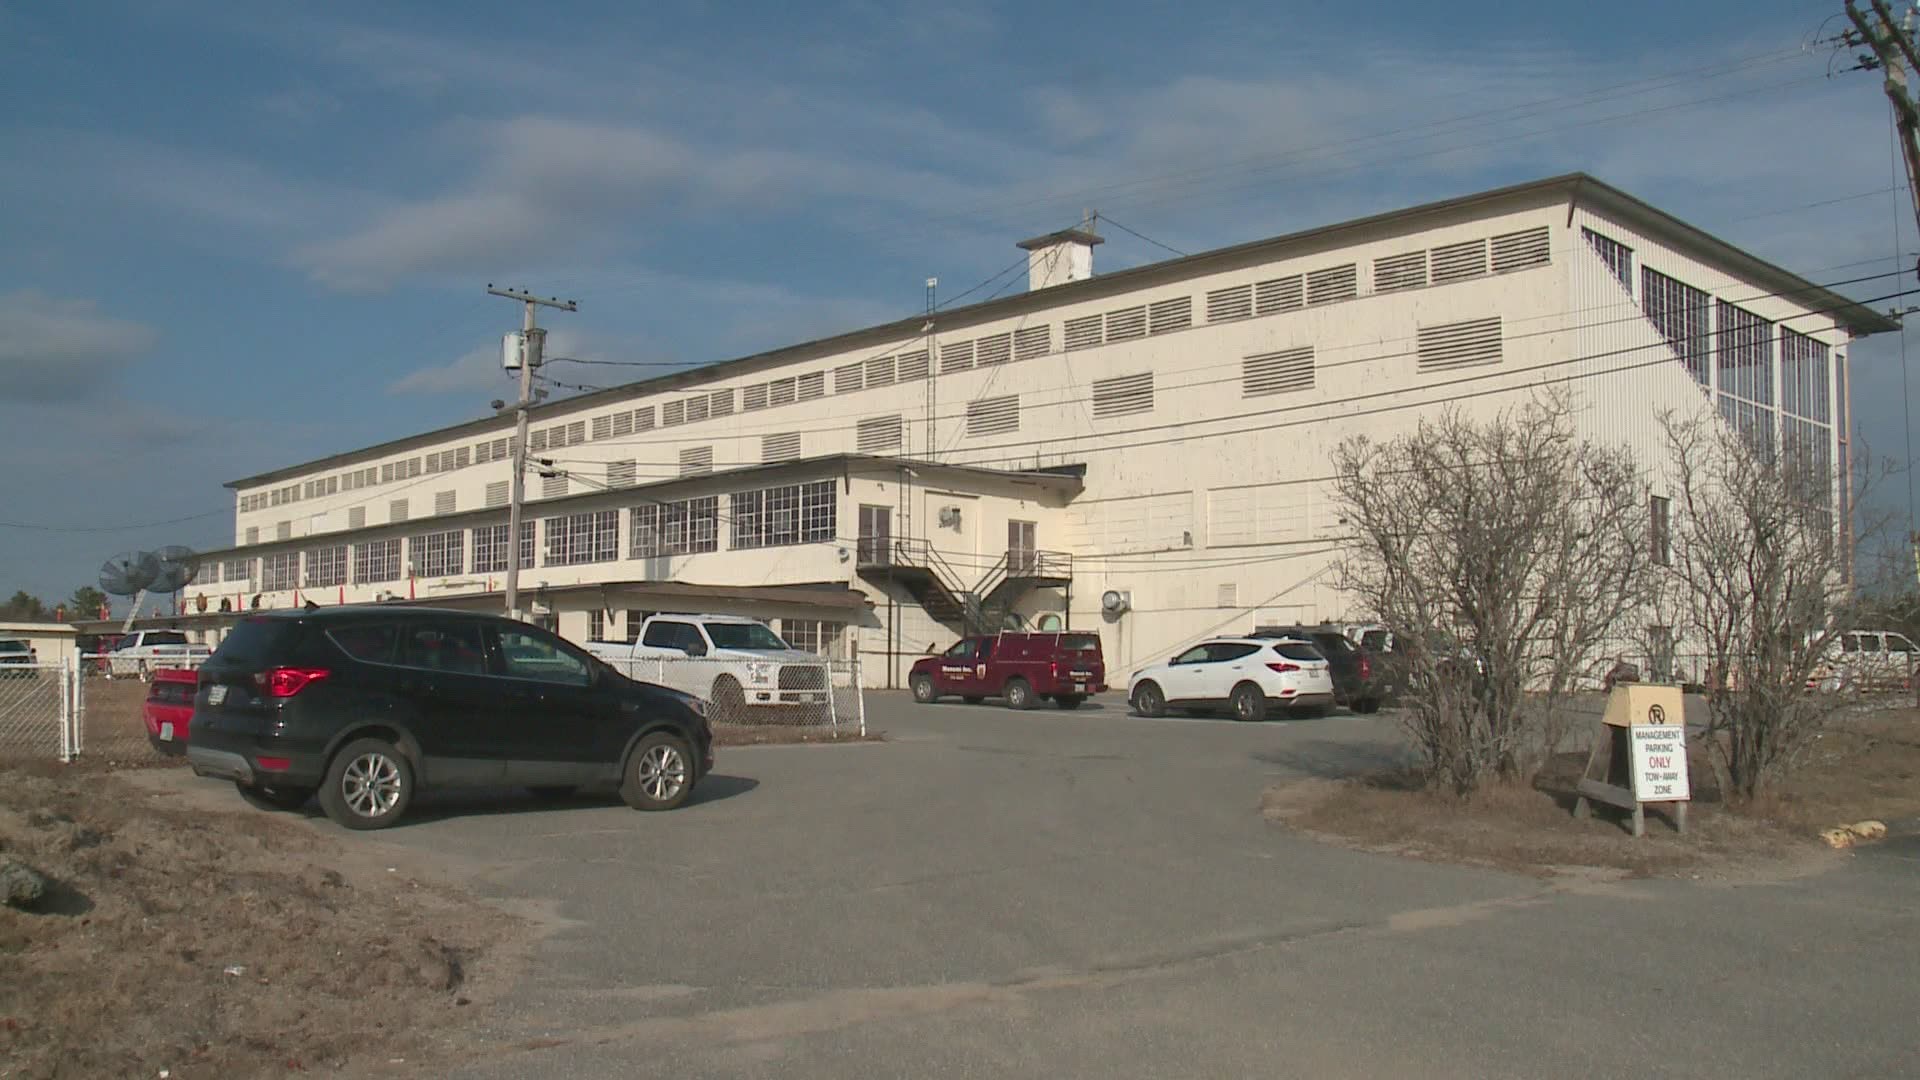 Maine has its first mass vaccination site at the former Scarborough Downs